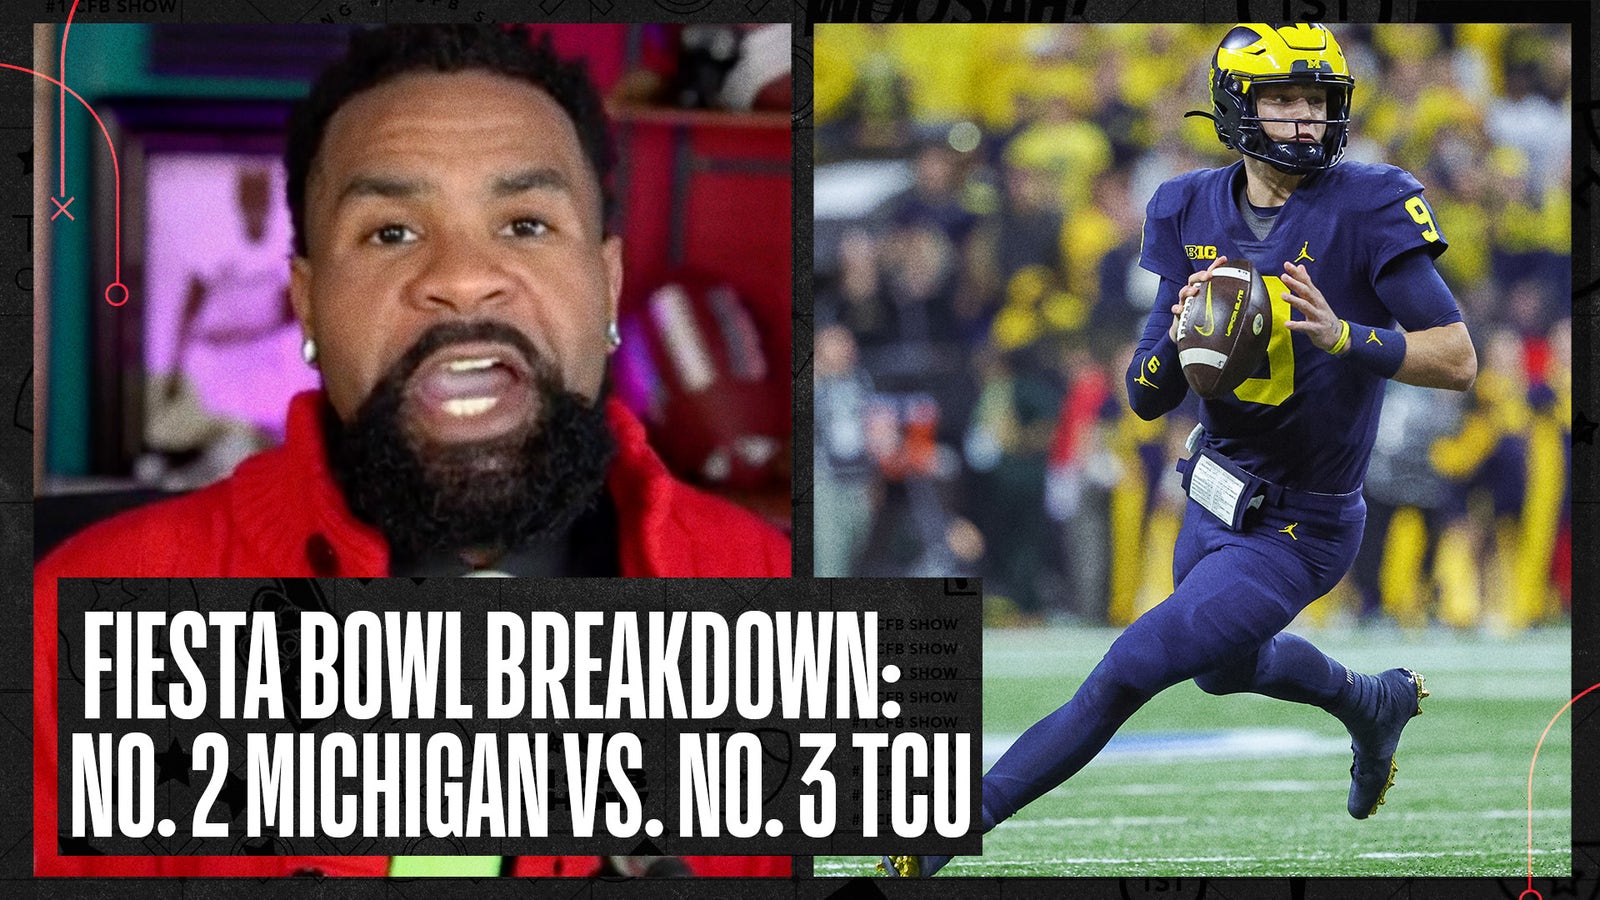 What's at stake for Michigan and TCU?